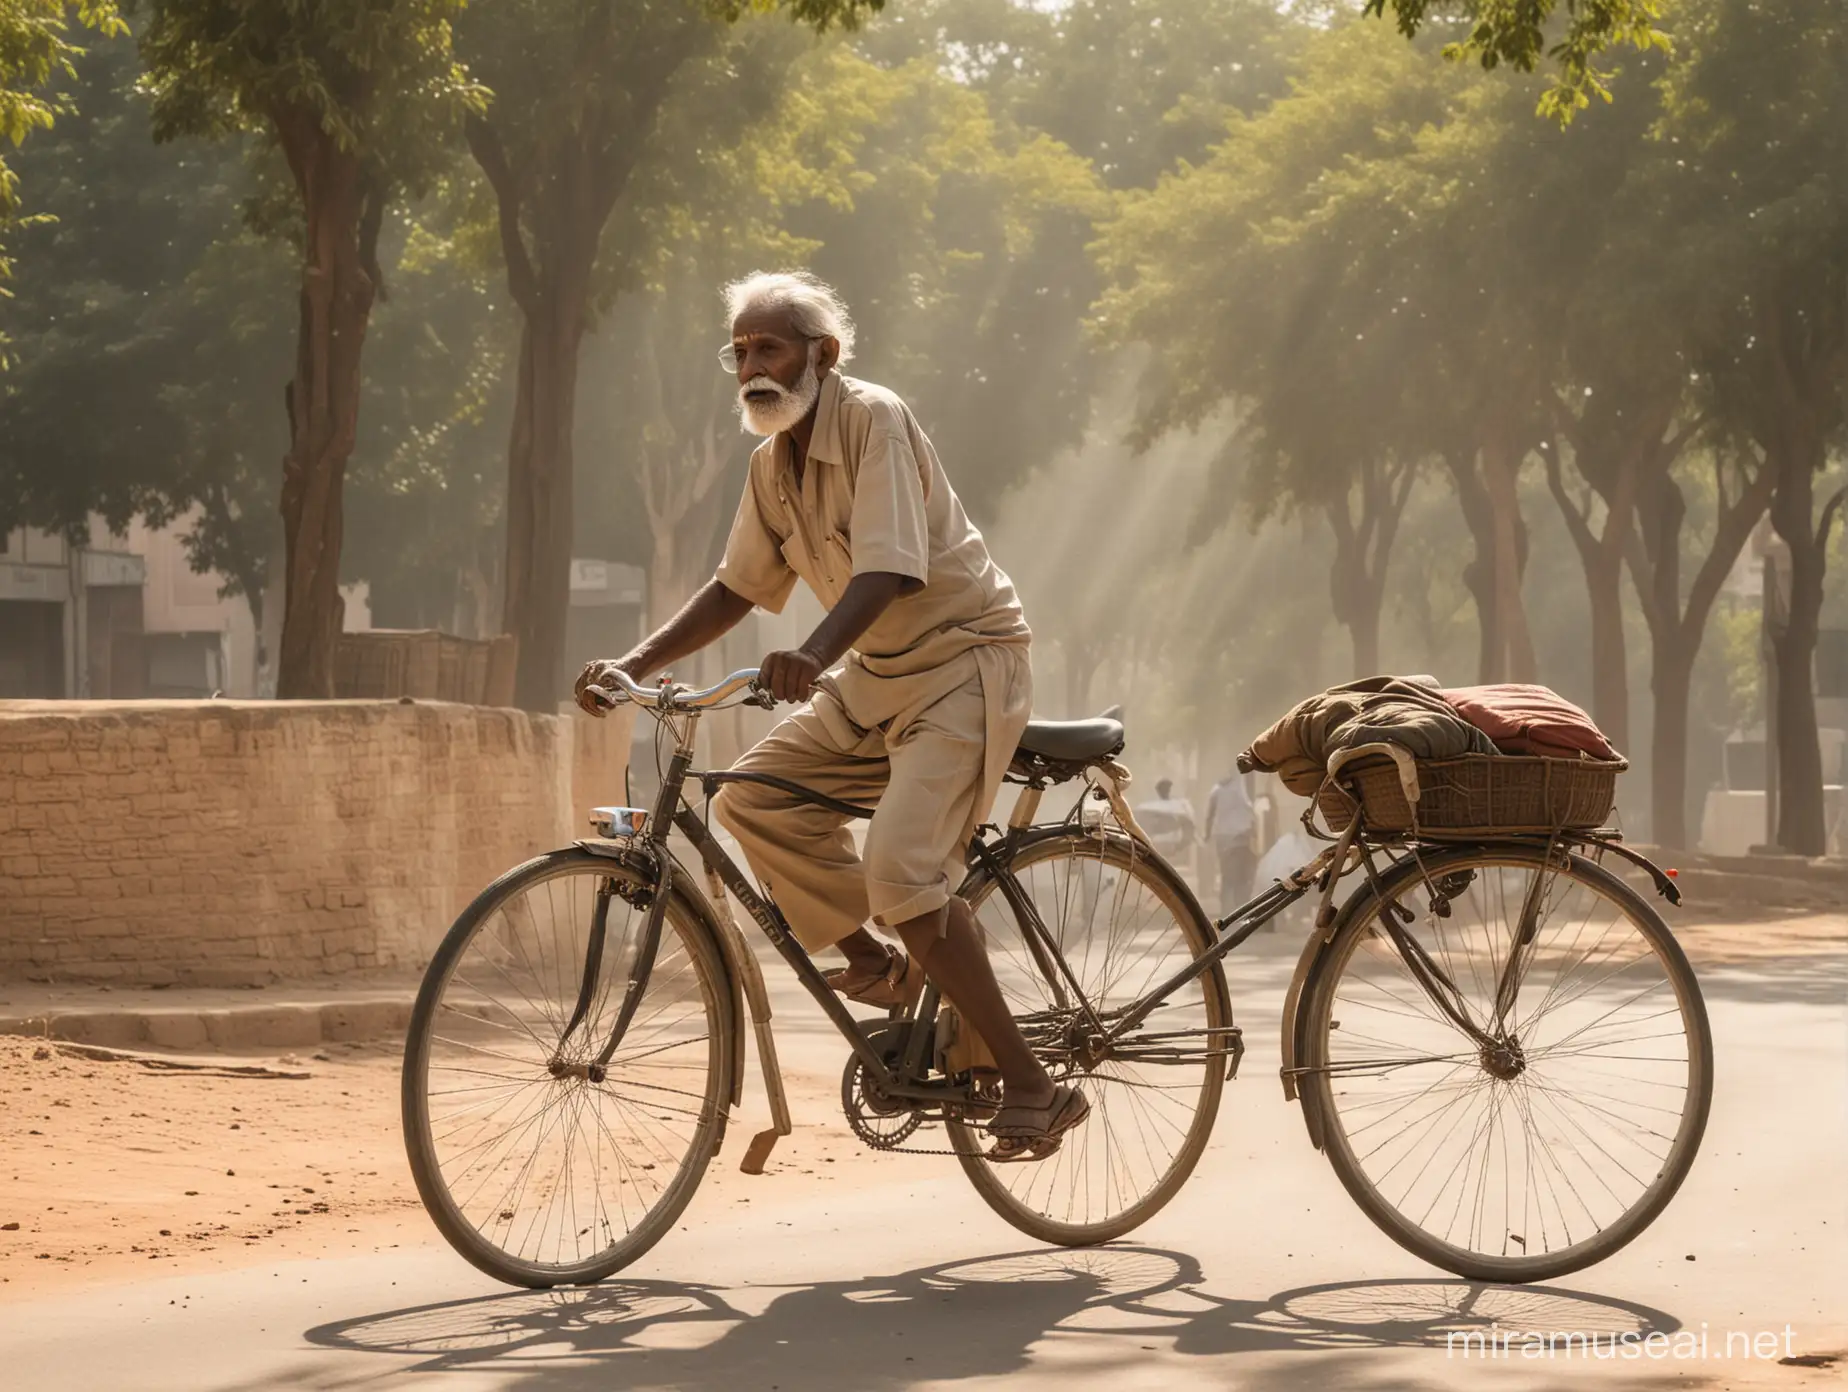 An old Indian man riding his bicycle in scorching heat.